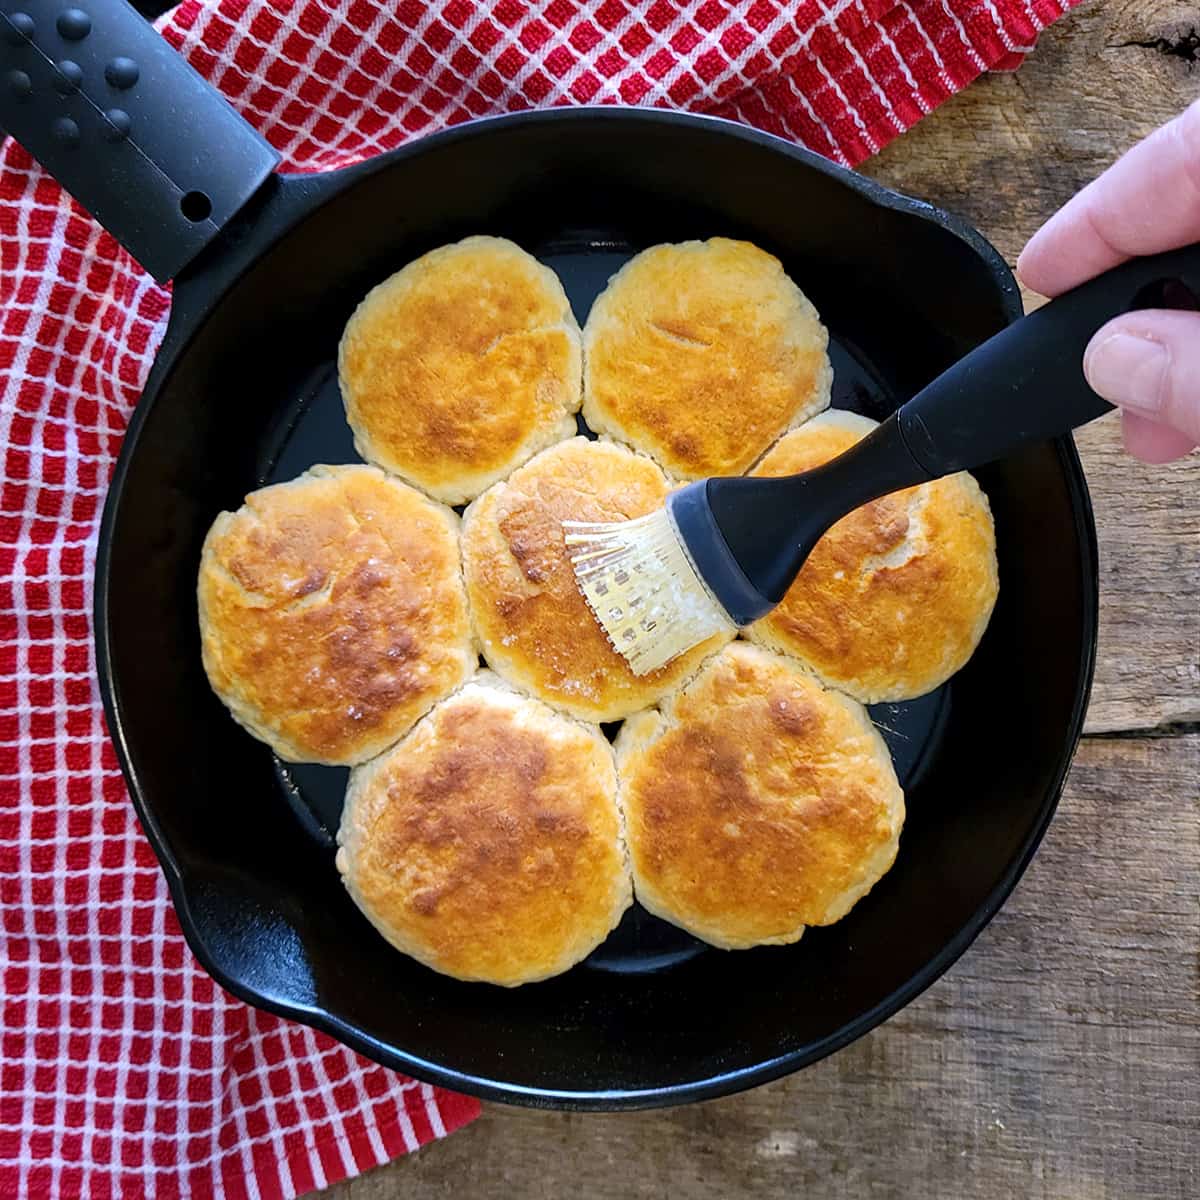 Basting baked biscuits with butter in a cast iron skillet.